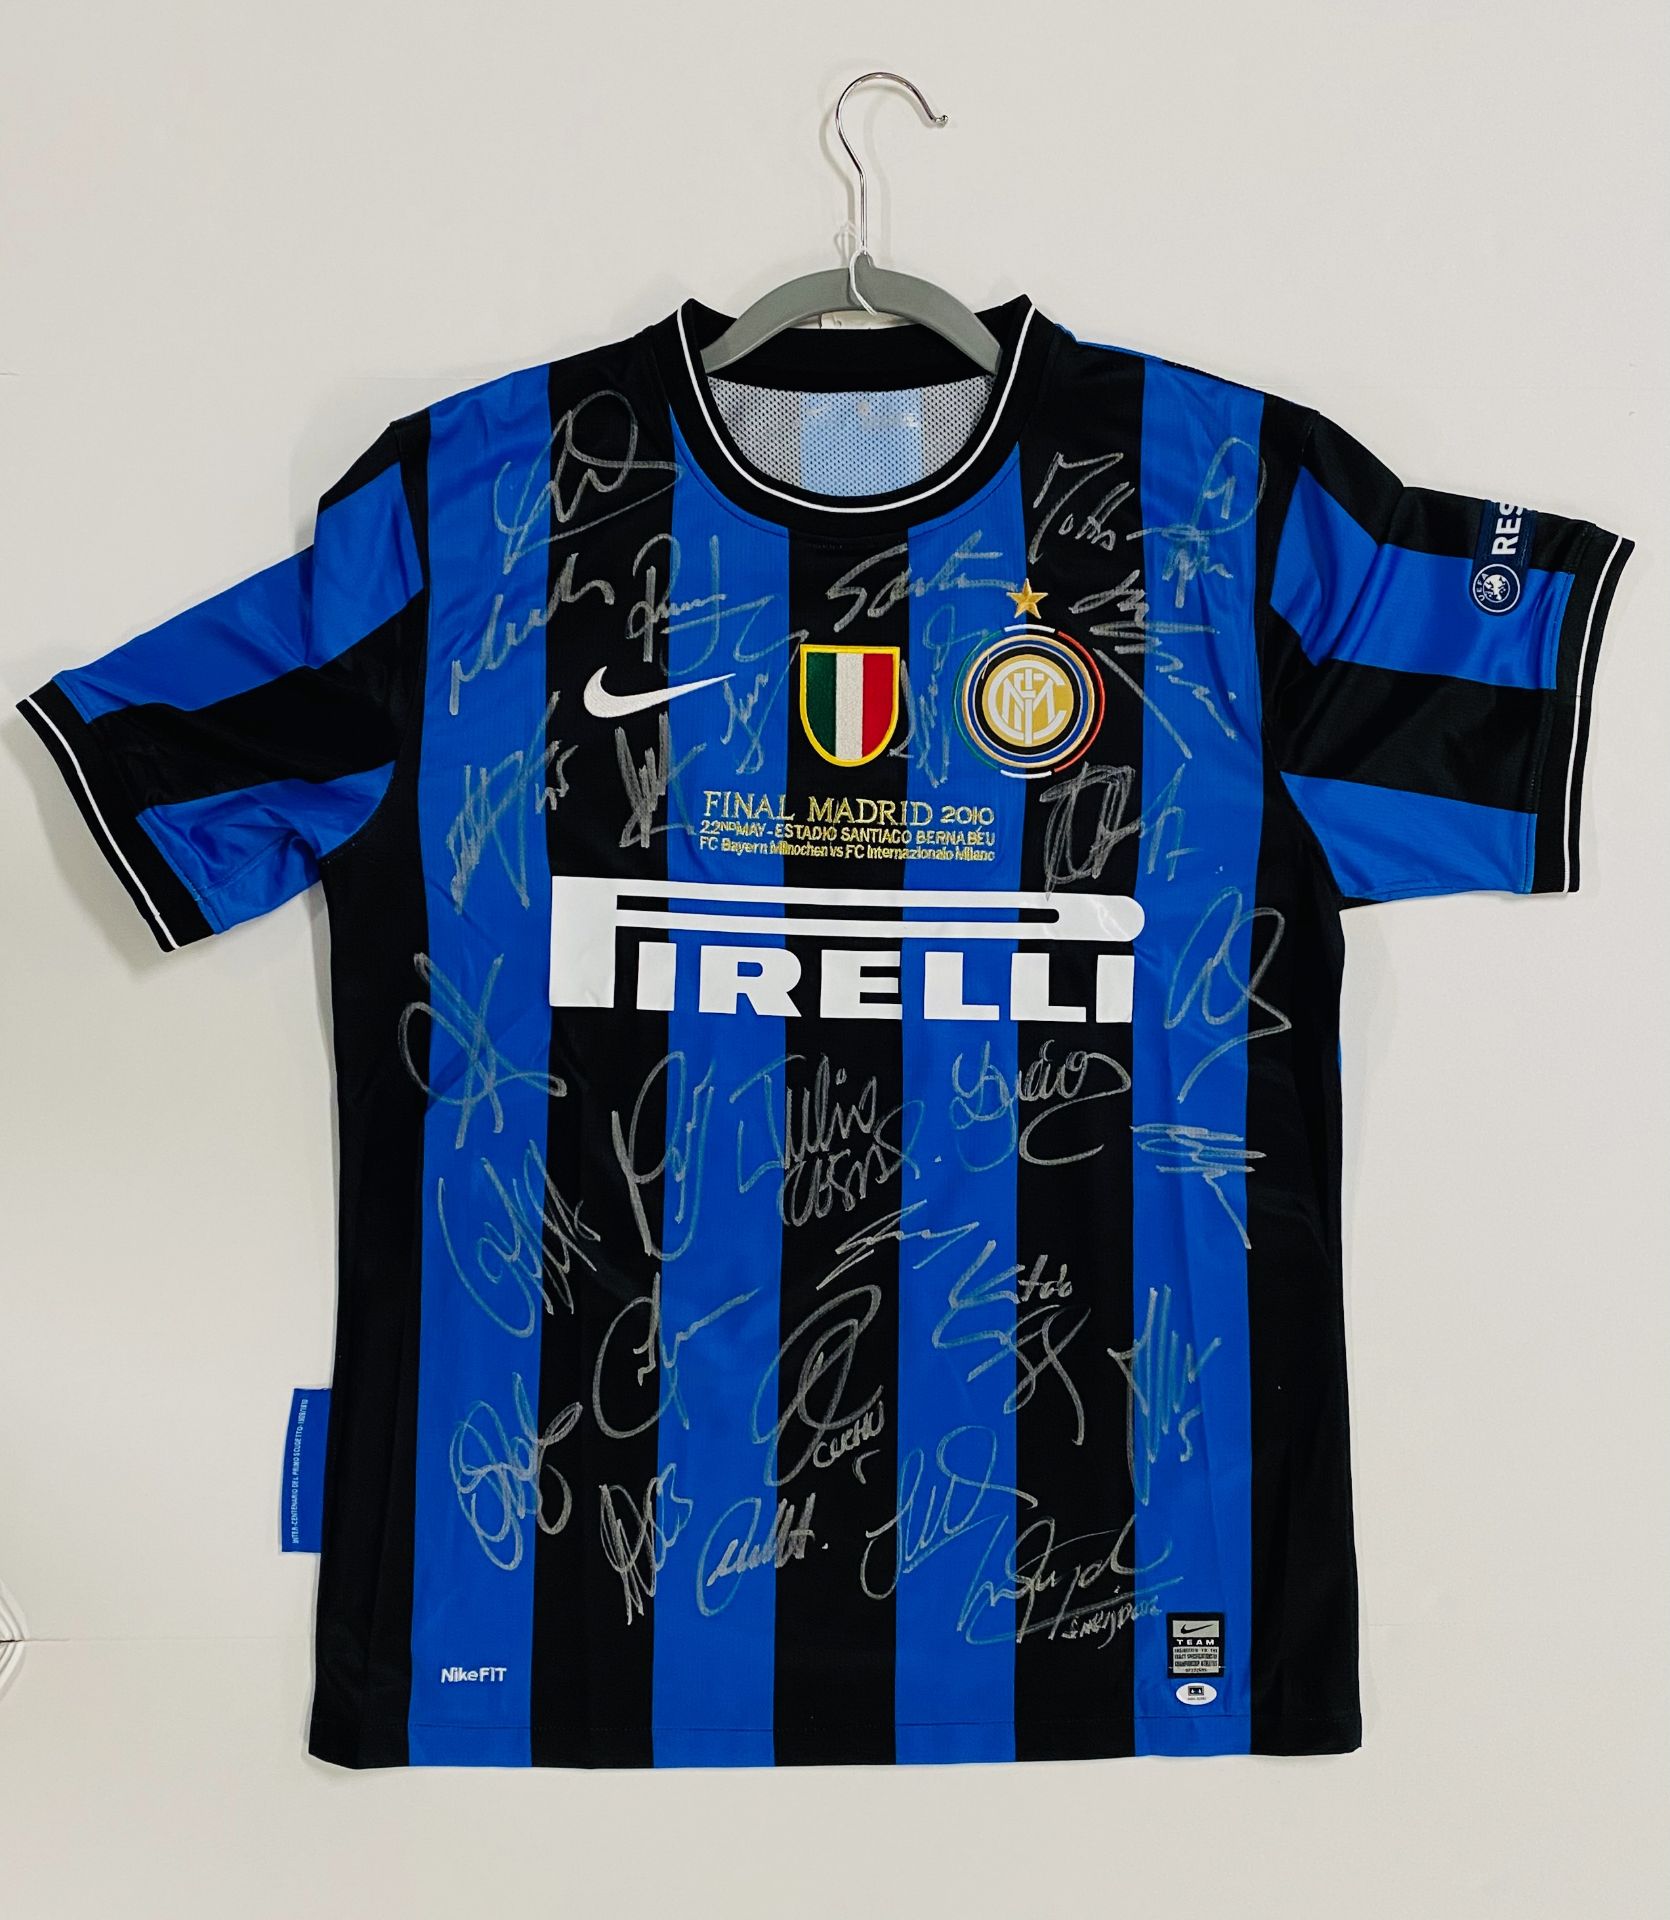 Inter Milan 2010 Champions League winners signed jersey